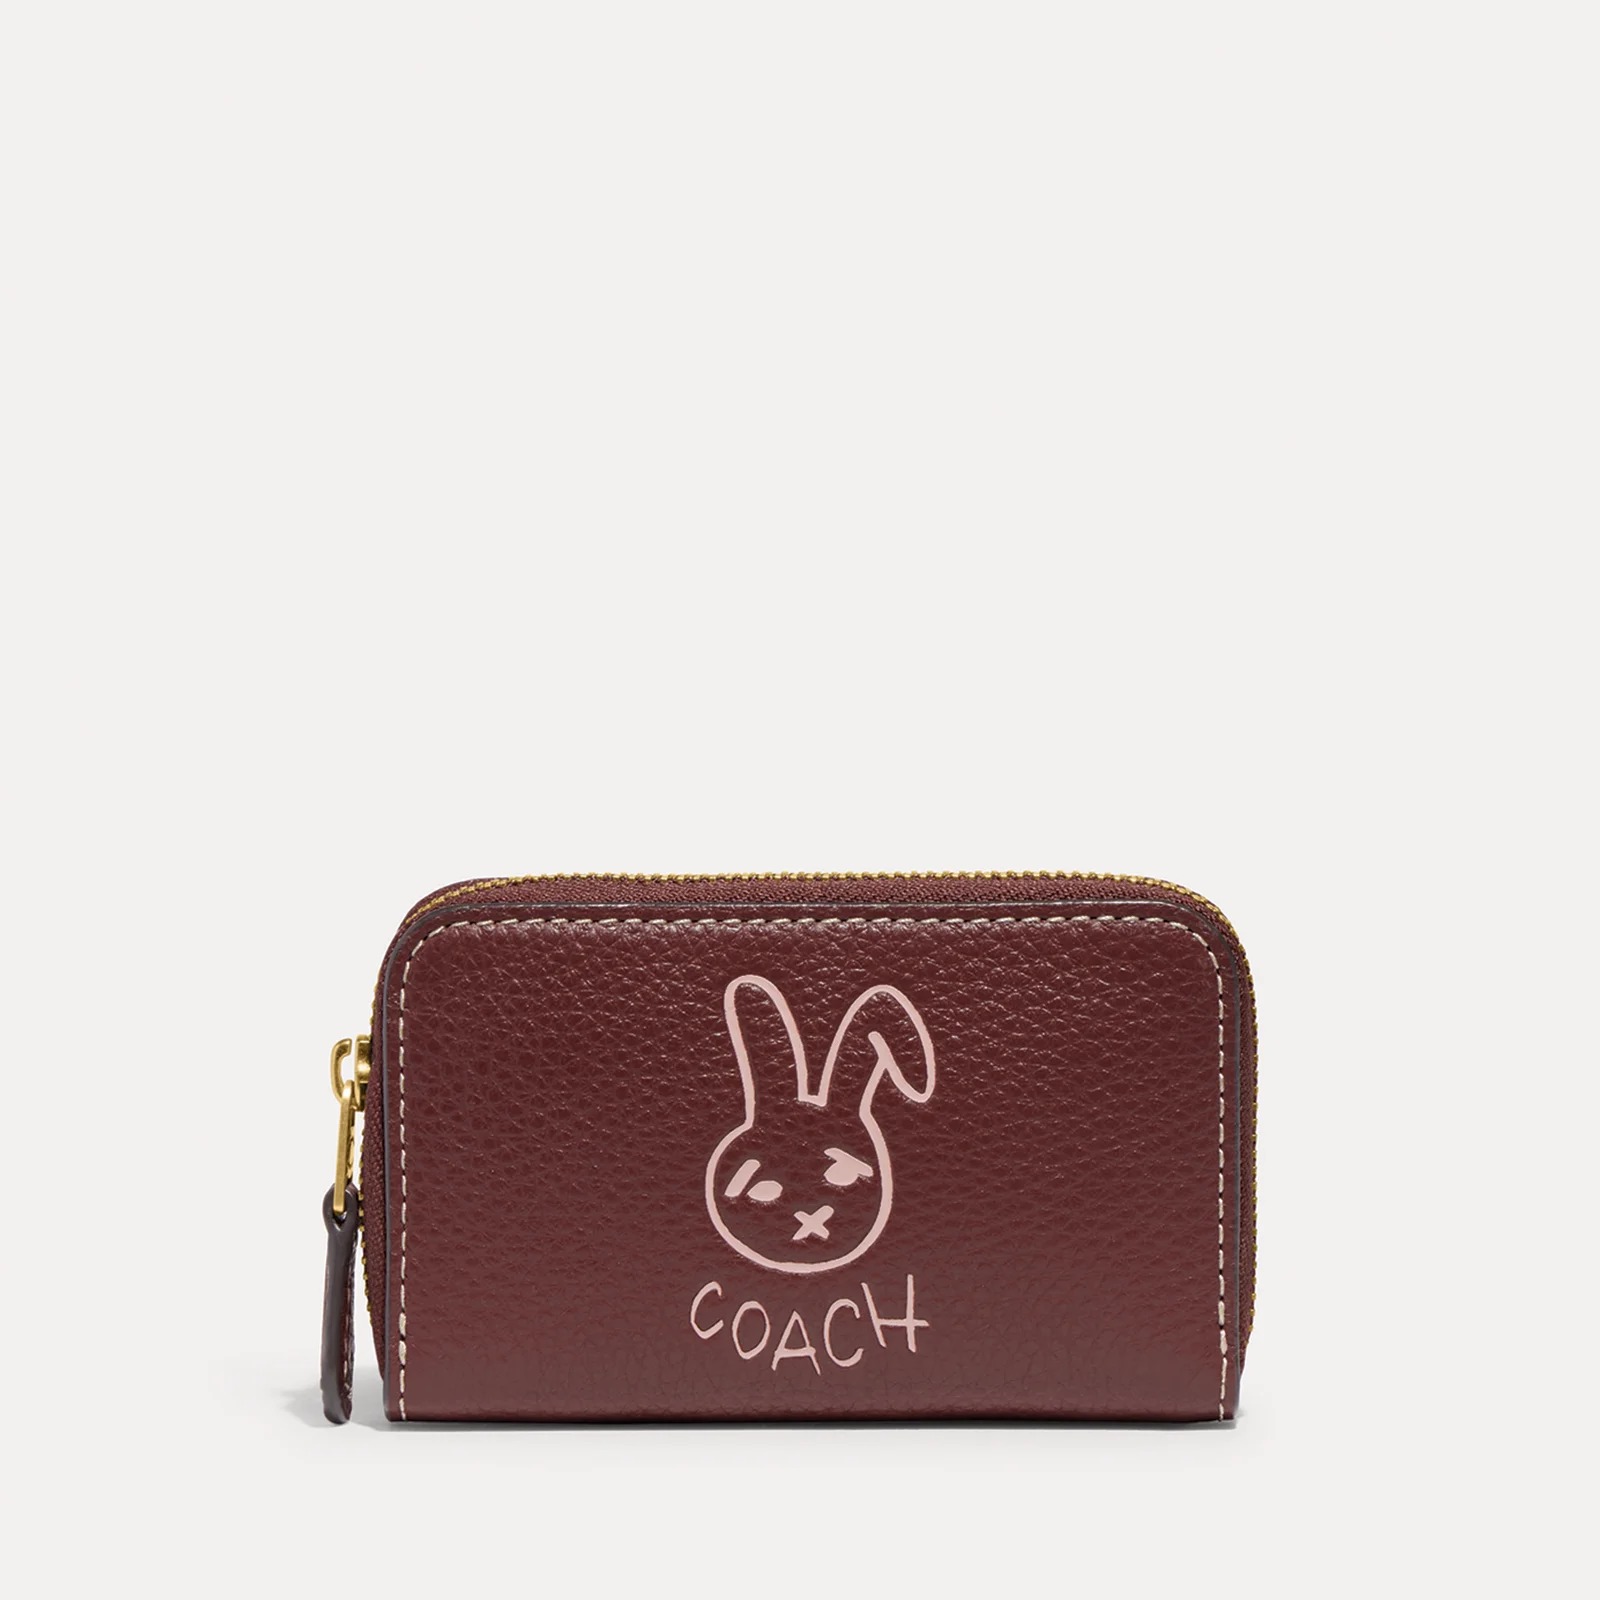 Coach Bunny Graphic Signature Coated Canvas and Leather Wallet Image 1